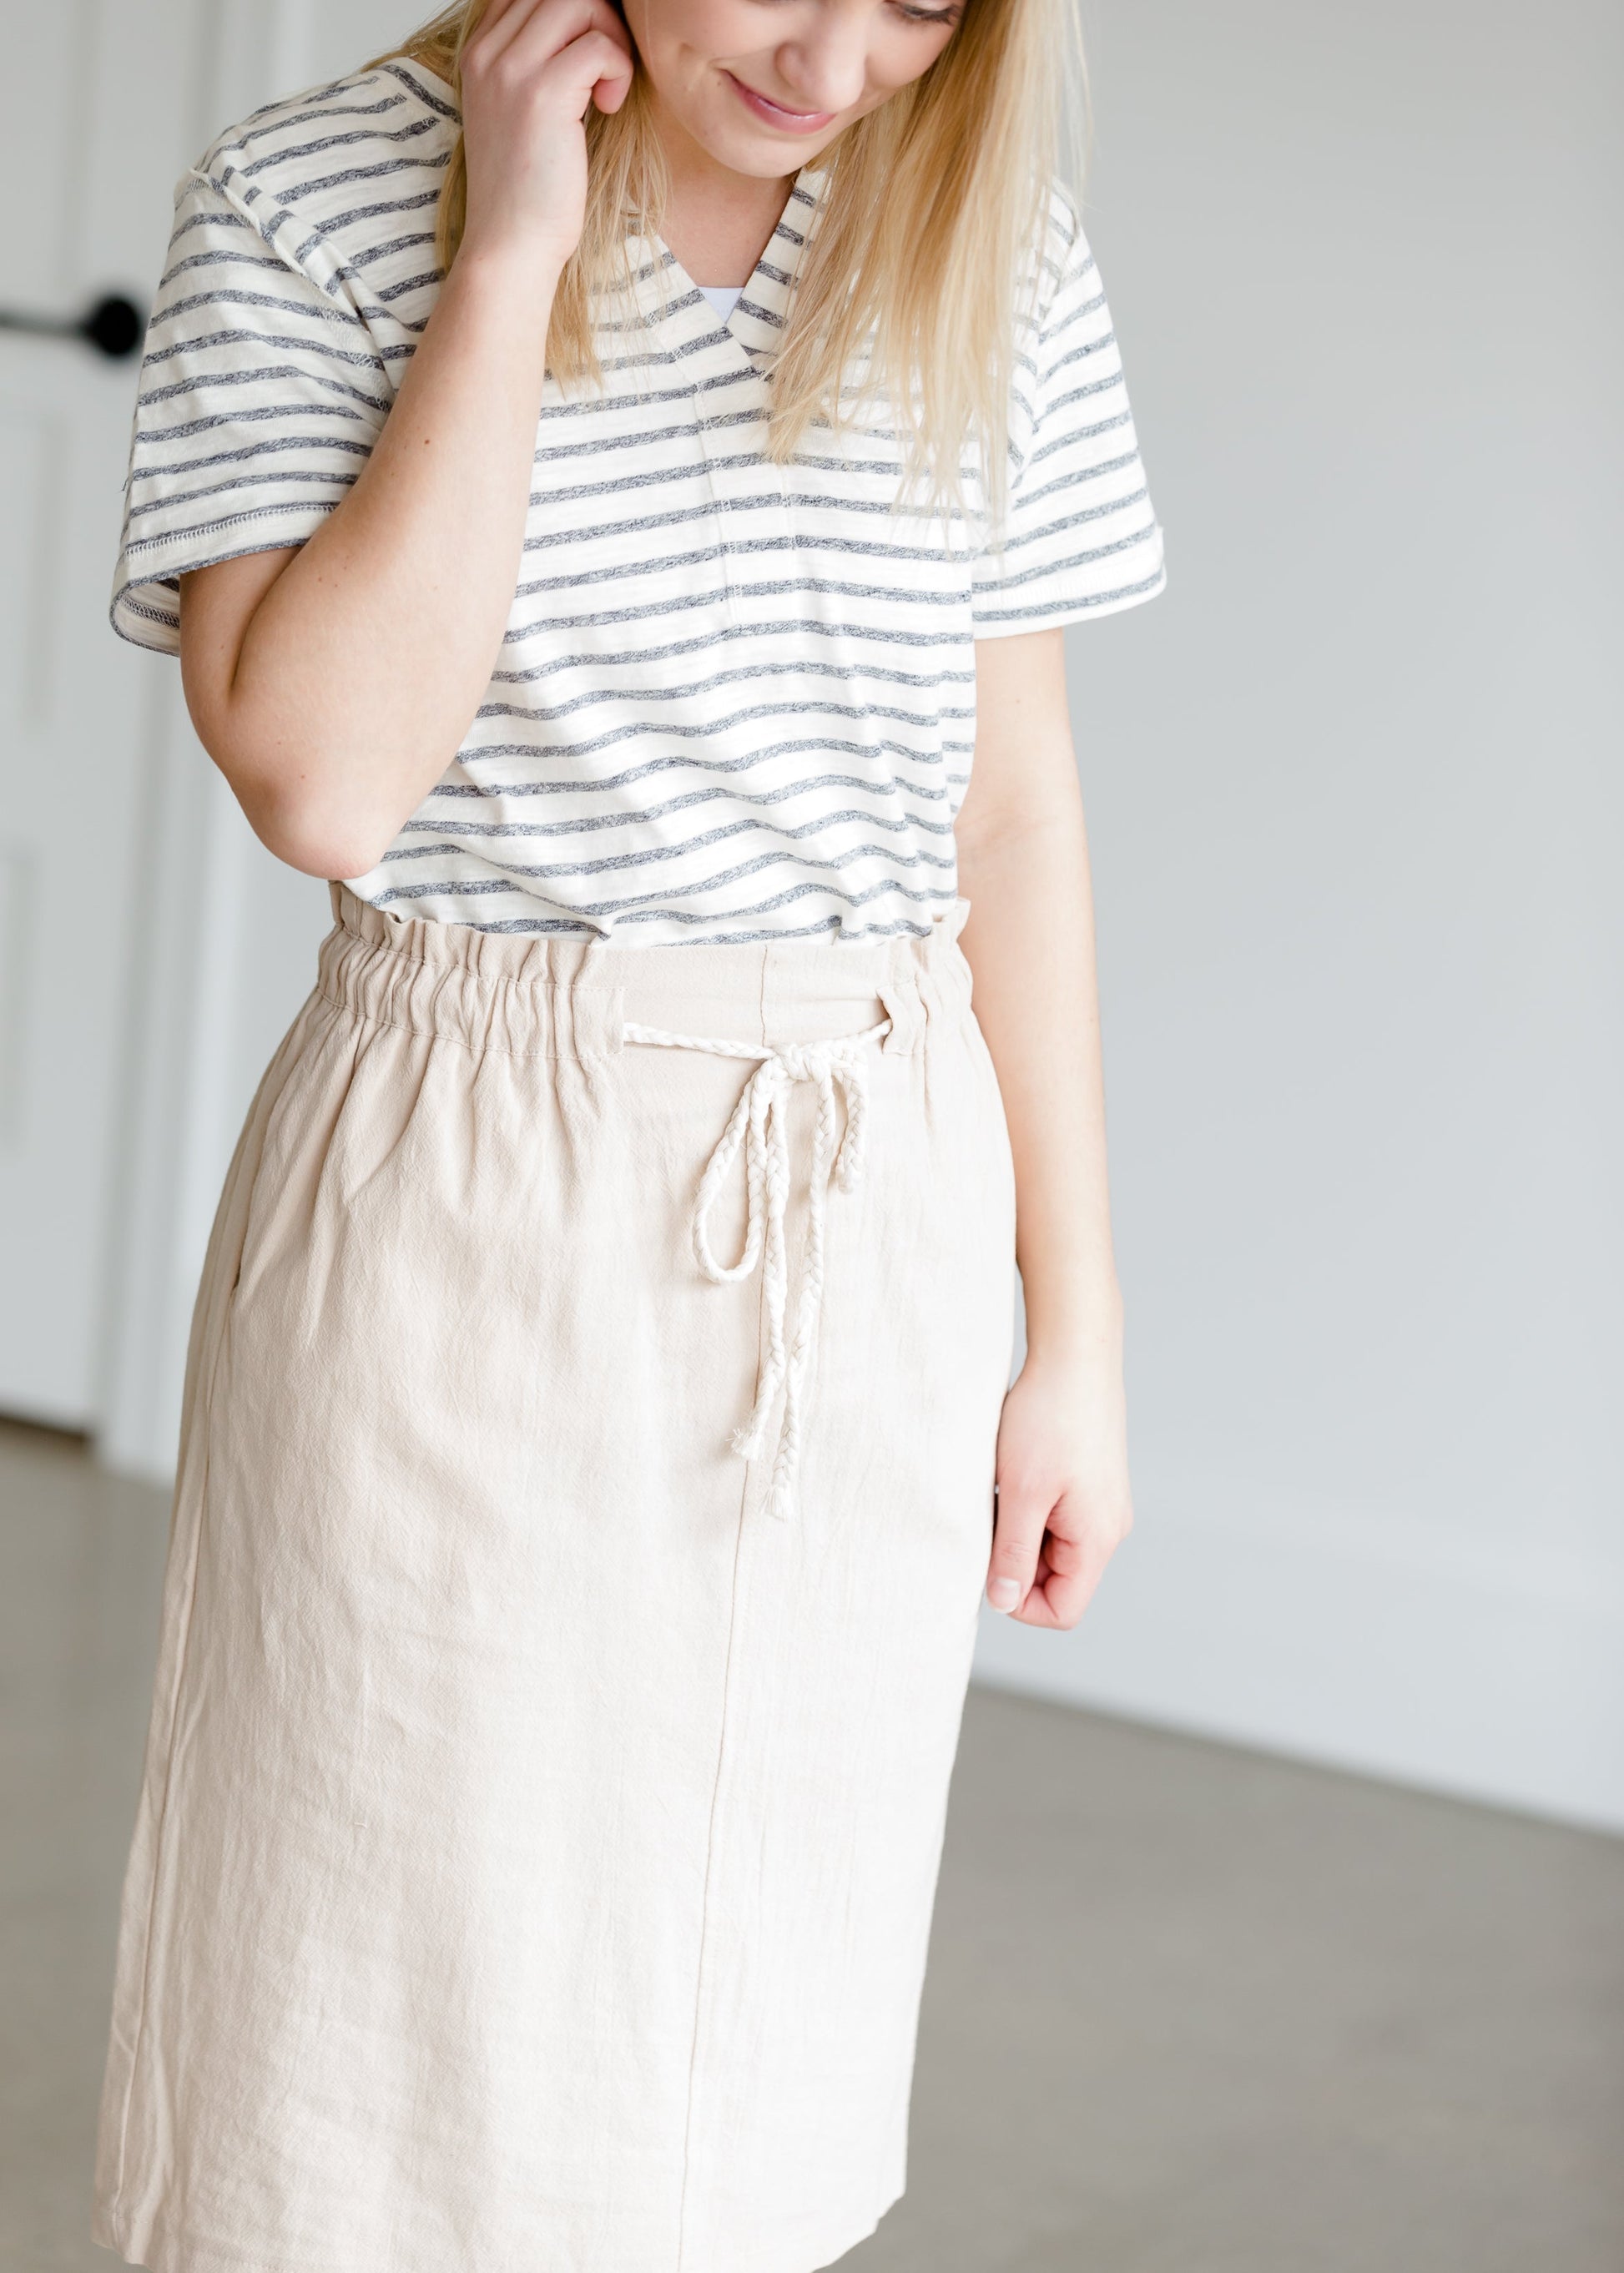 Cotton Belted Midi Skirt - FINAL SALE Skirts